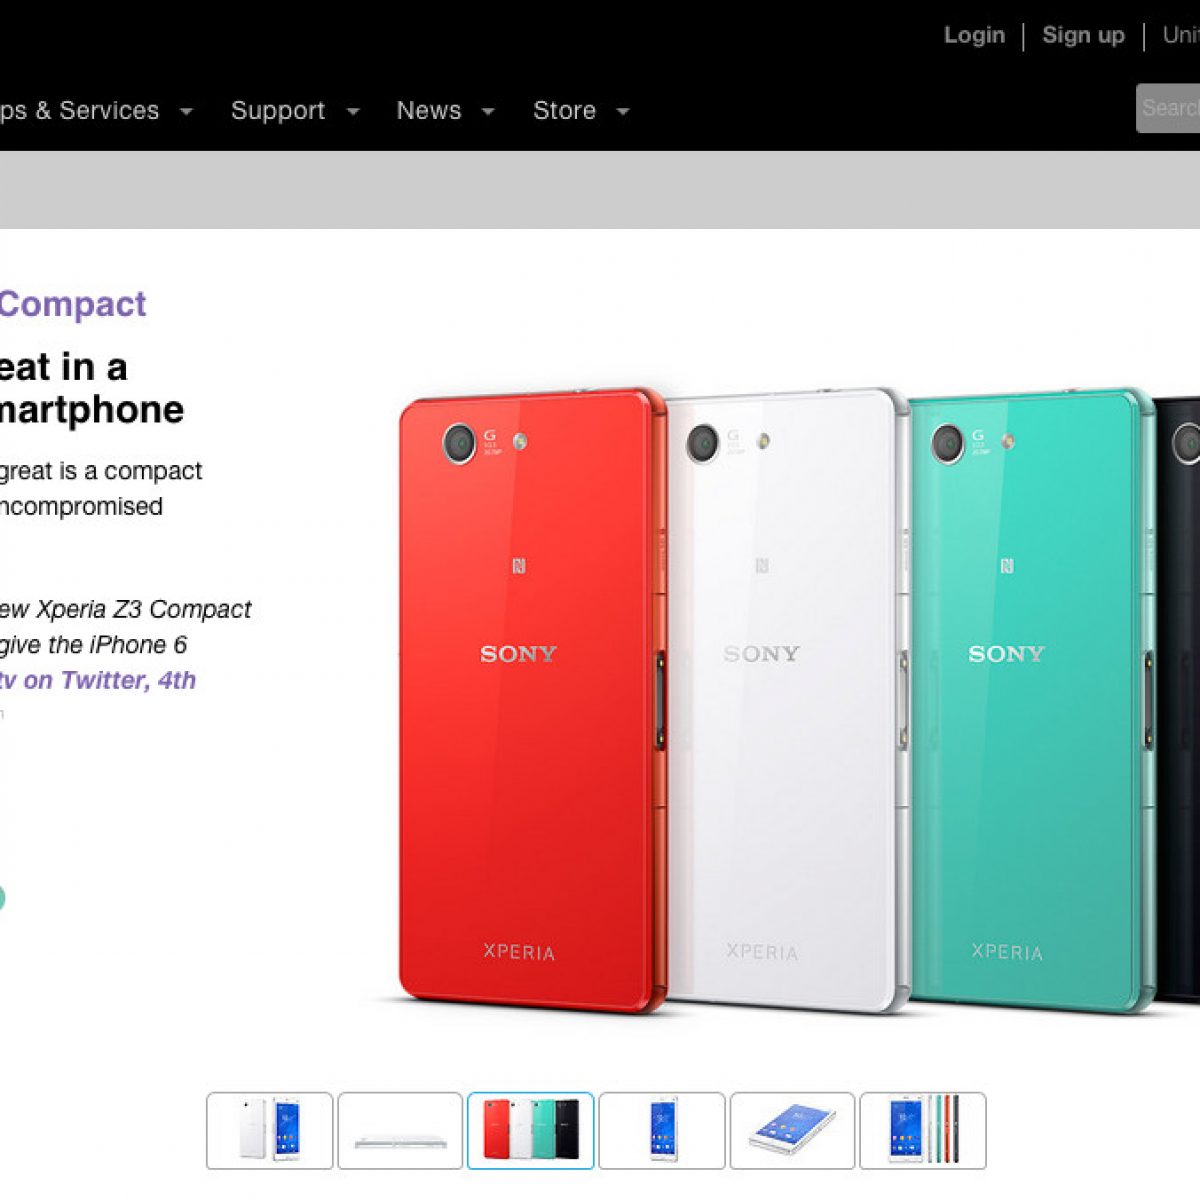 mechanisme hond verkoudheid Sony Xperia Z3 Compact Now Available in the US Via Sony's Store for $529